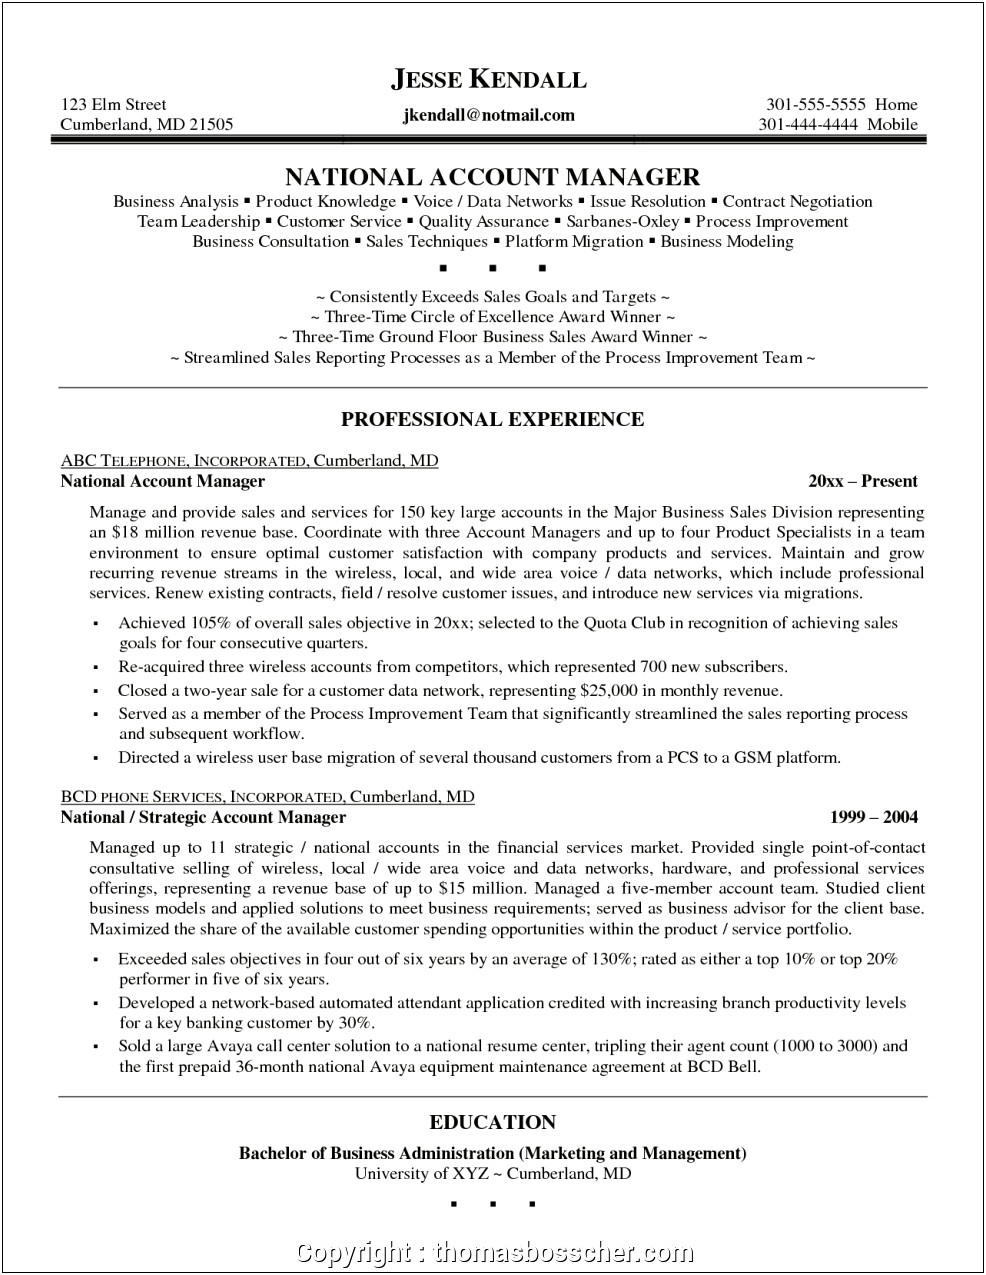 Account Manager Job Objective Resume